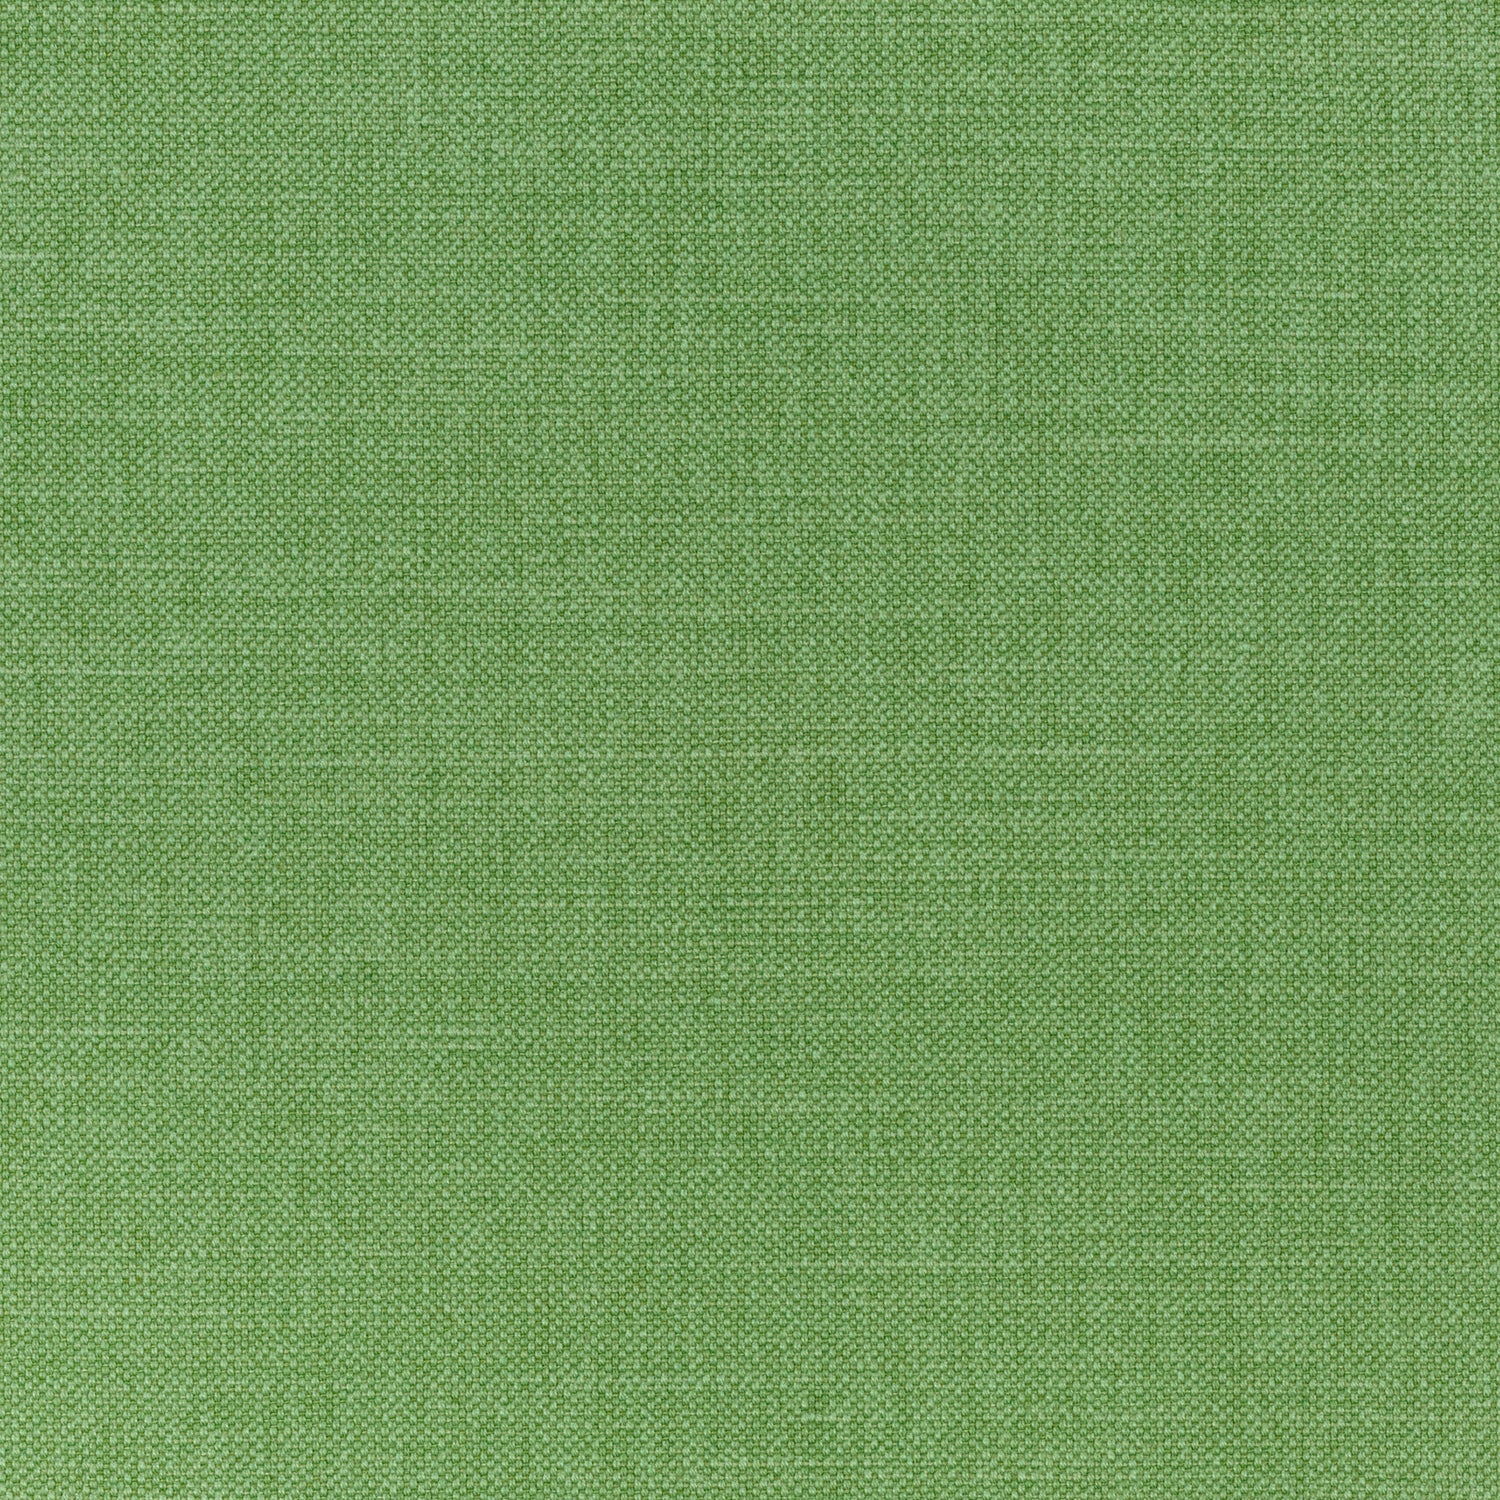 Prisma fabric in grass color - pattern number W70140 - by Thibaut in the Woven Resource Vol 12 Prisma Fabrics collection